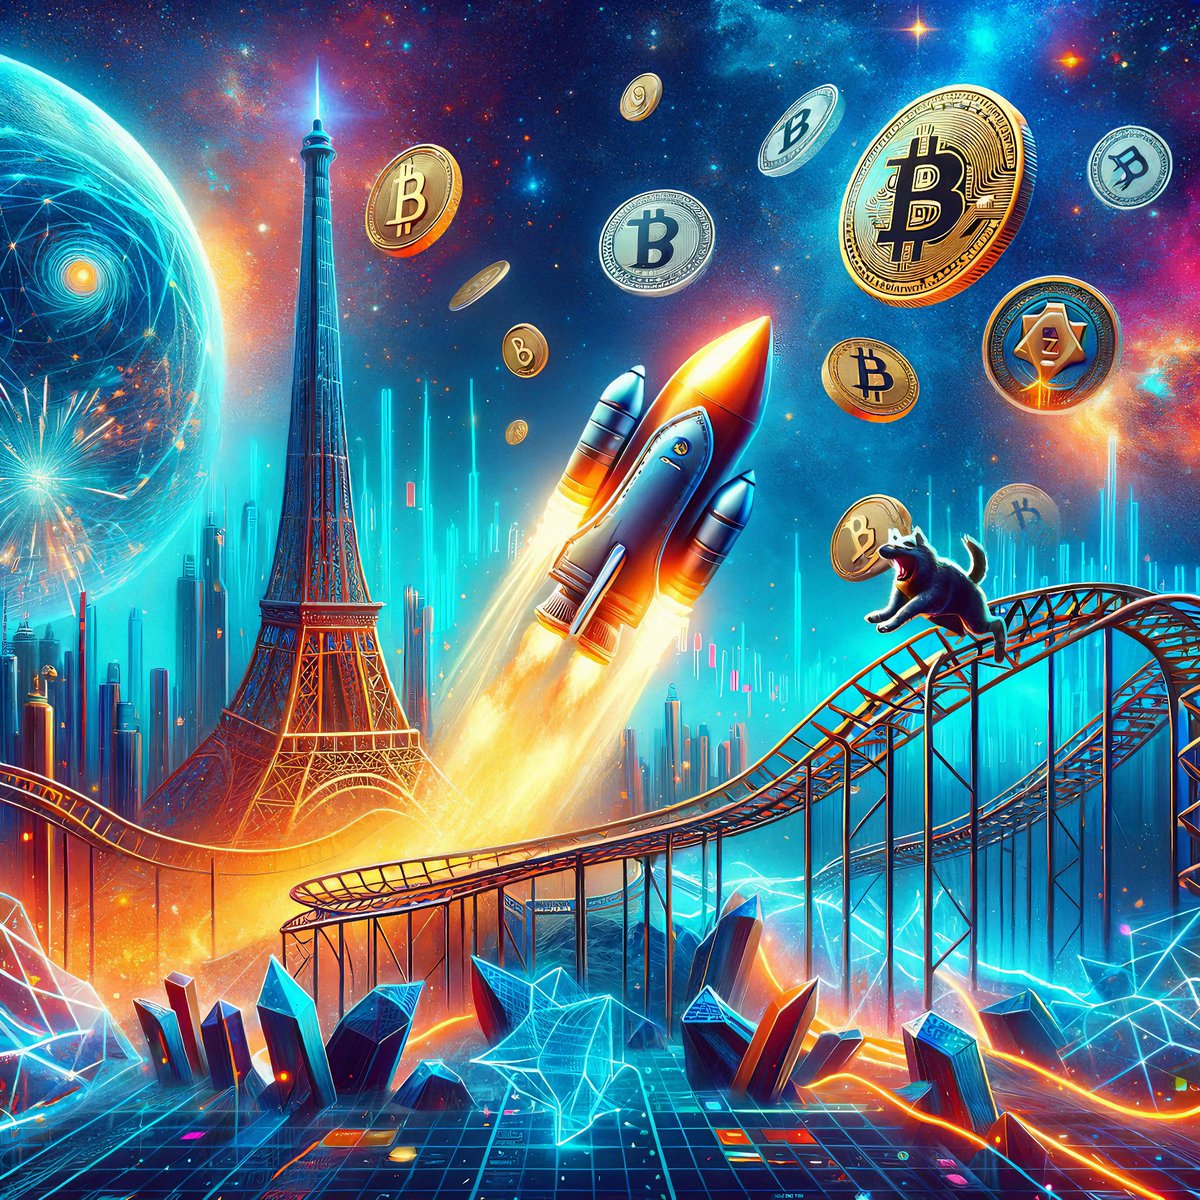 🌟 Next 24 Hours in Crypto: 

Will BITCOIN•PEPE•MATRIX maintain its astronomical 401.61% climb? Can WANKO•MANKO•RUNES keep up the momentum? One thing's for sure, the crypto cosmos is in for a wild ride! 🎢 Keep your eyes peeled! #CryptoPredictions #24hrCryptoForecast 🚀💰